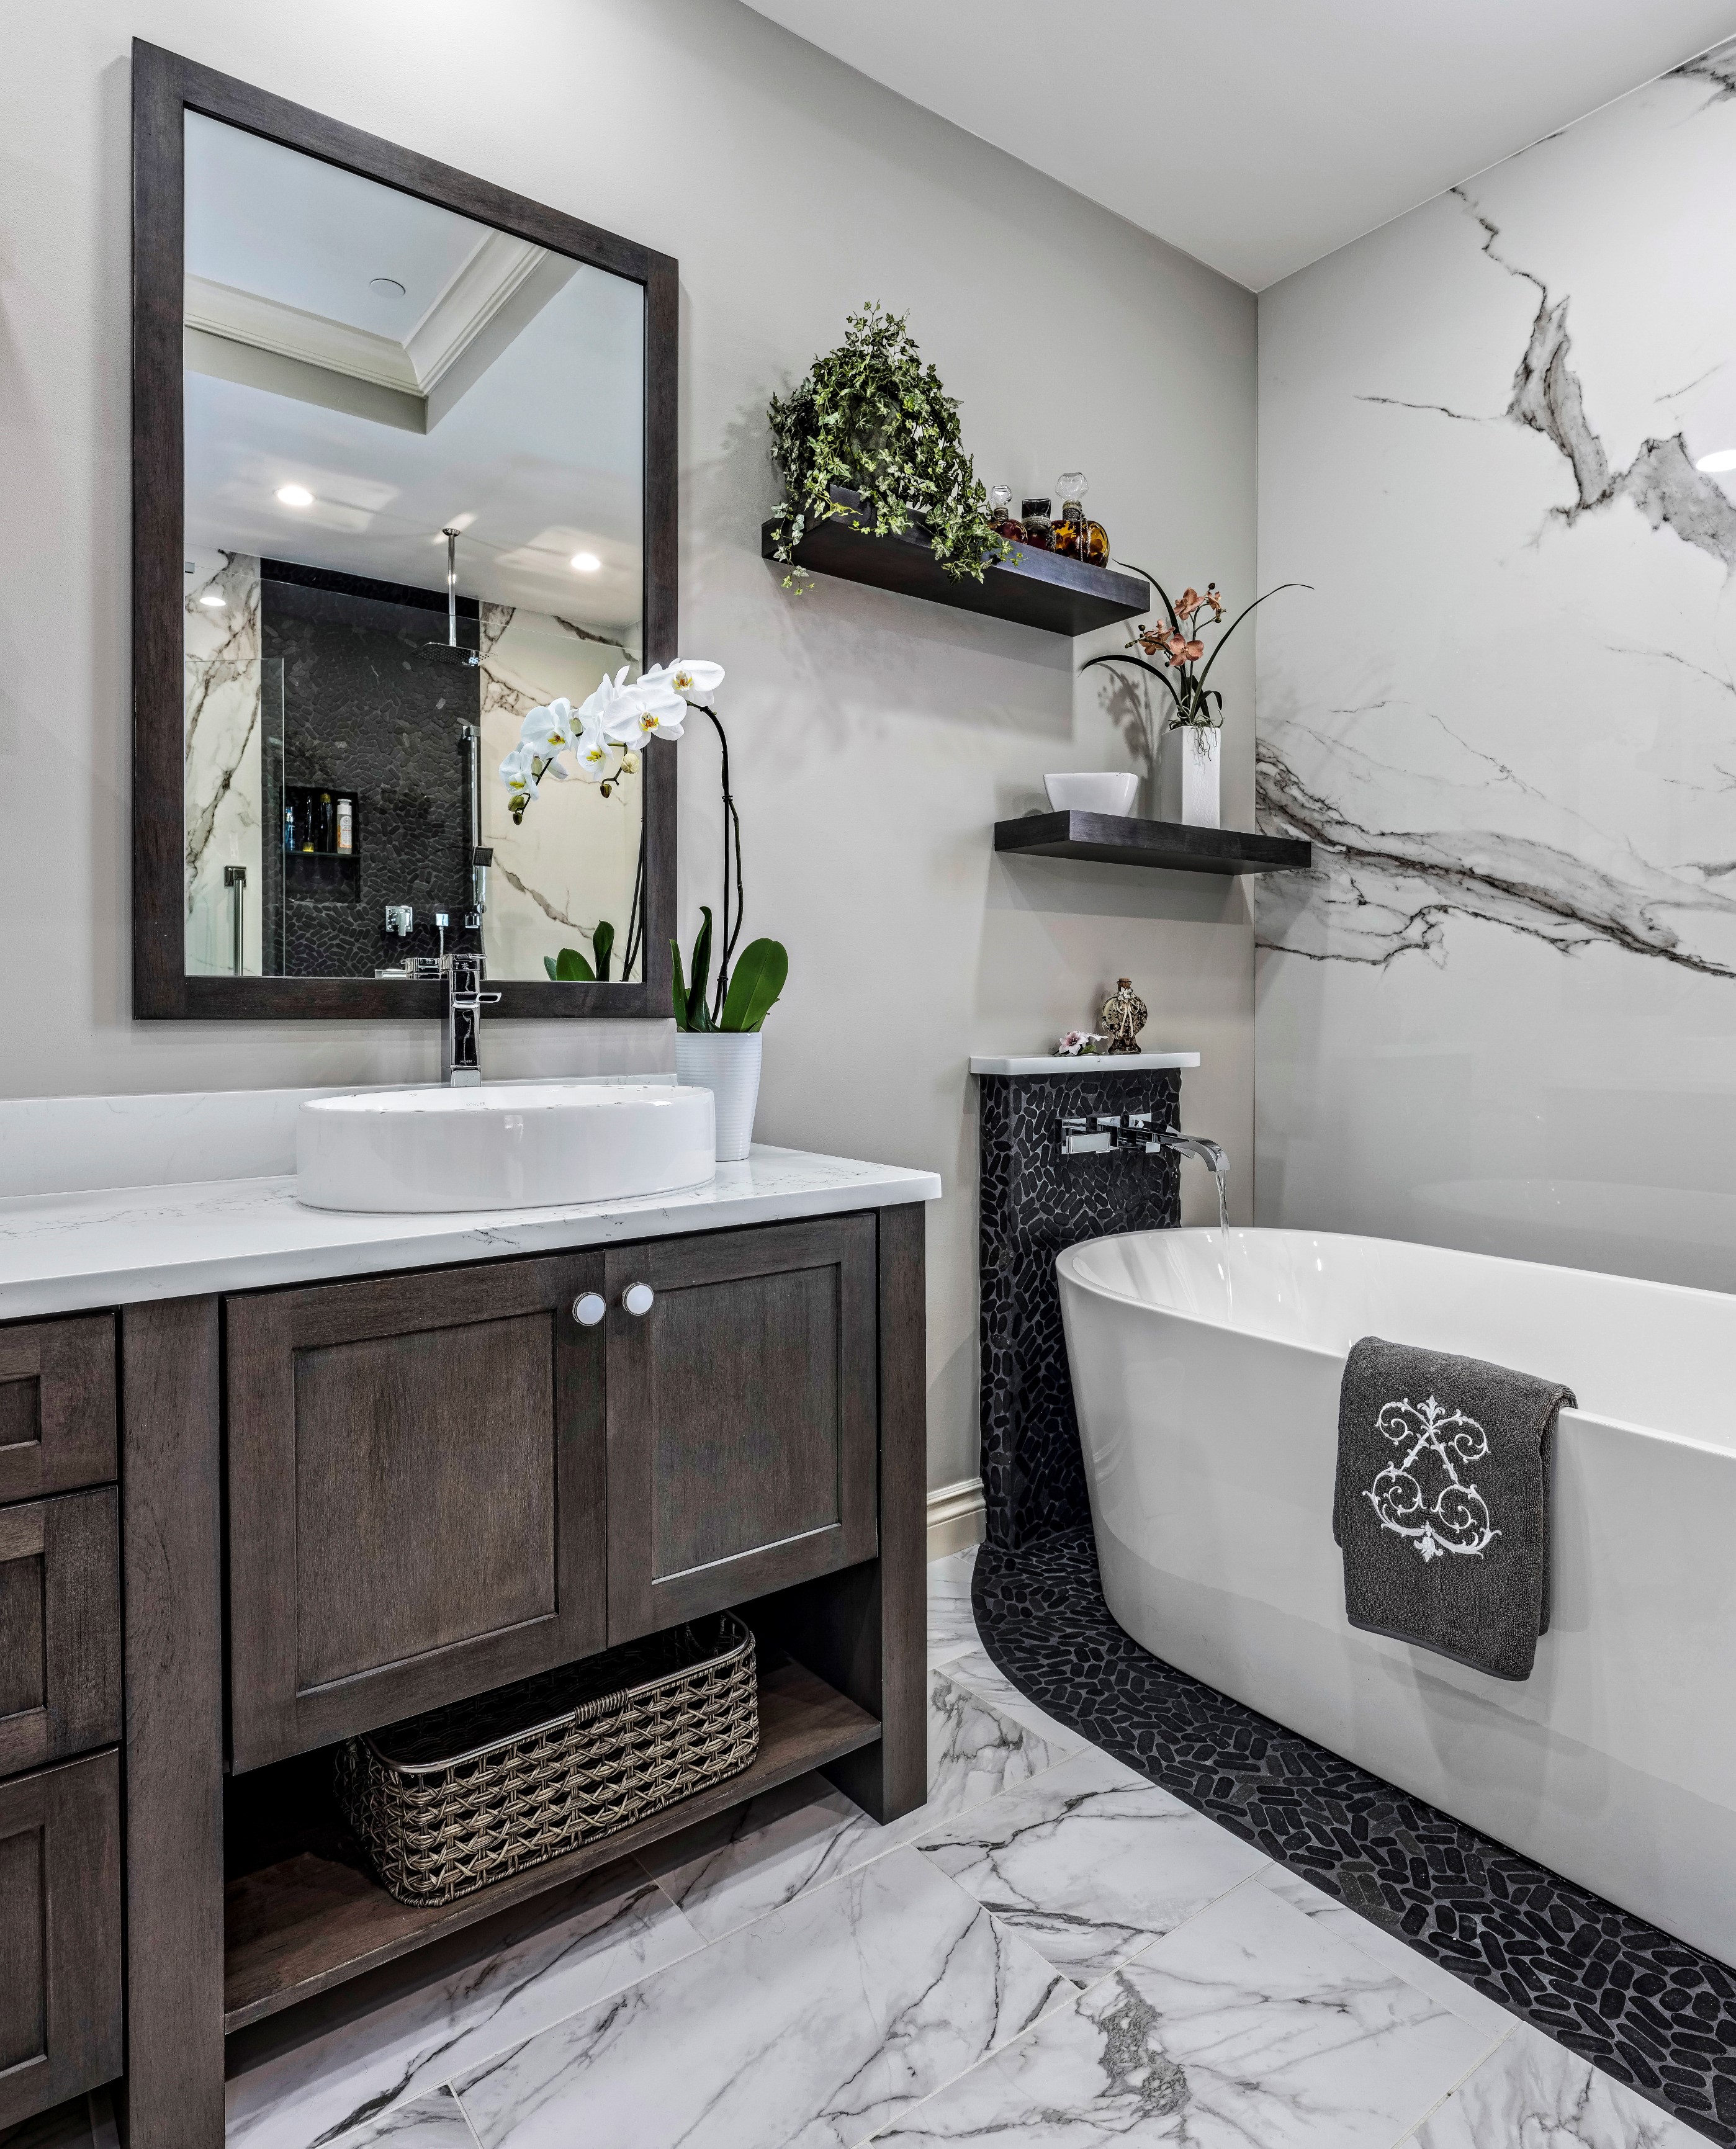 Bathroom Remodeling Typically Cost, How Much Money Does It Take To Fill A Bathtub